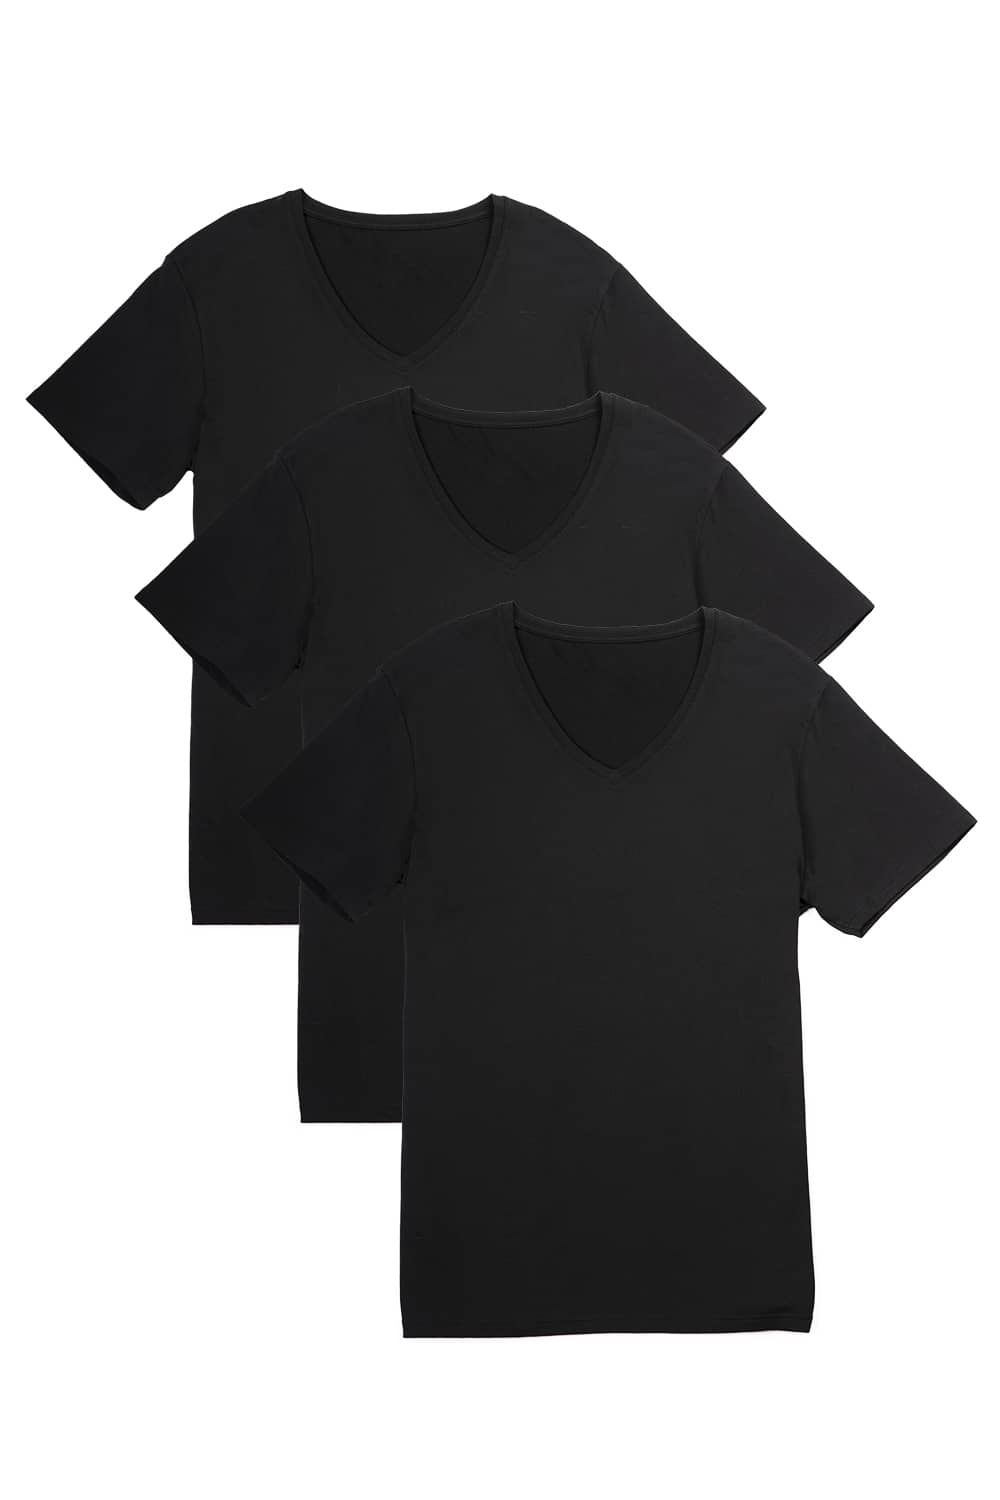 Men's Classic Fit Soft Stretch V-Neck Undershirt Mens>Casual>Tops Fishers Finery Black Small 3 Pack